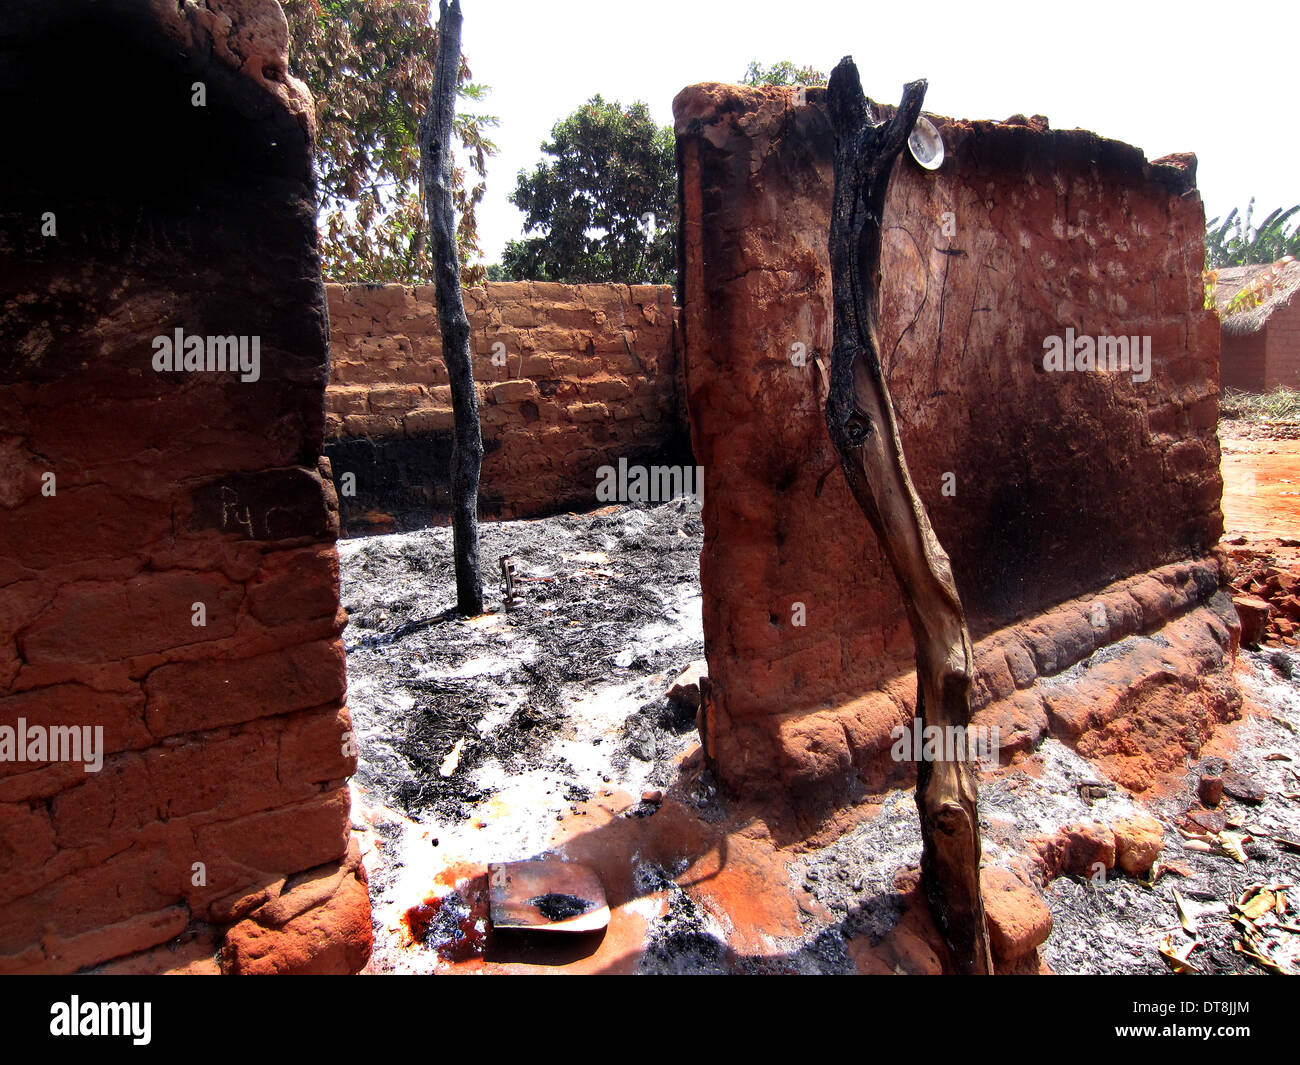 HANDOUT - An Amnesty International handout photo dated 30 January 2014 shows a house in Peulh neighborhood in Bossemptele that was attacked and burned by anti-balaka forces in January, Central African Republic. Photo: AMNESTY INTERNATIONAL / AHNDOUT/EDITORIAL USE ONLY/MANDATORY CREDIT/NO SALES Stock Photo